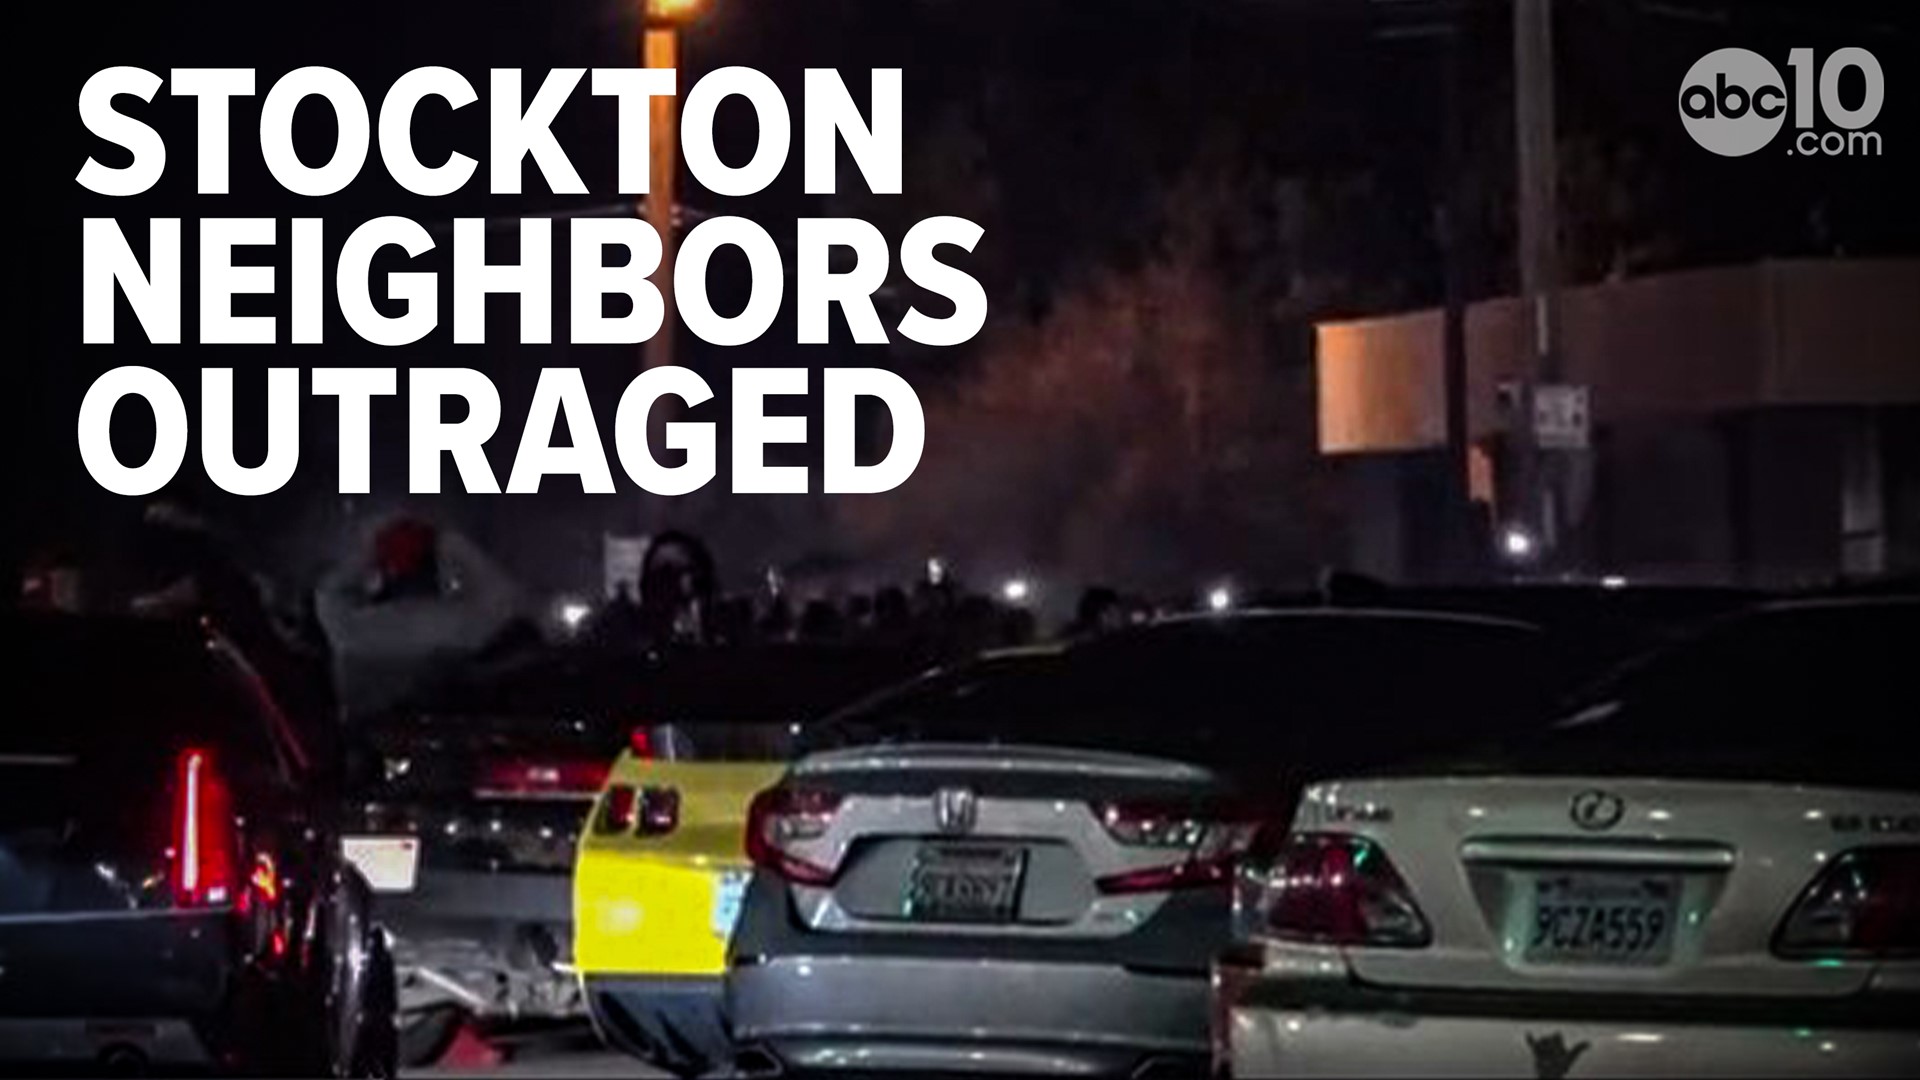 Hundreds of people gathered for a sideshow in Stockton to watch cars do donuts and burnouts, neighbors say cars were parked right in the middle of the street.